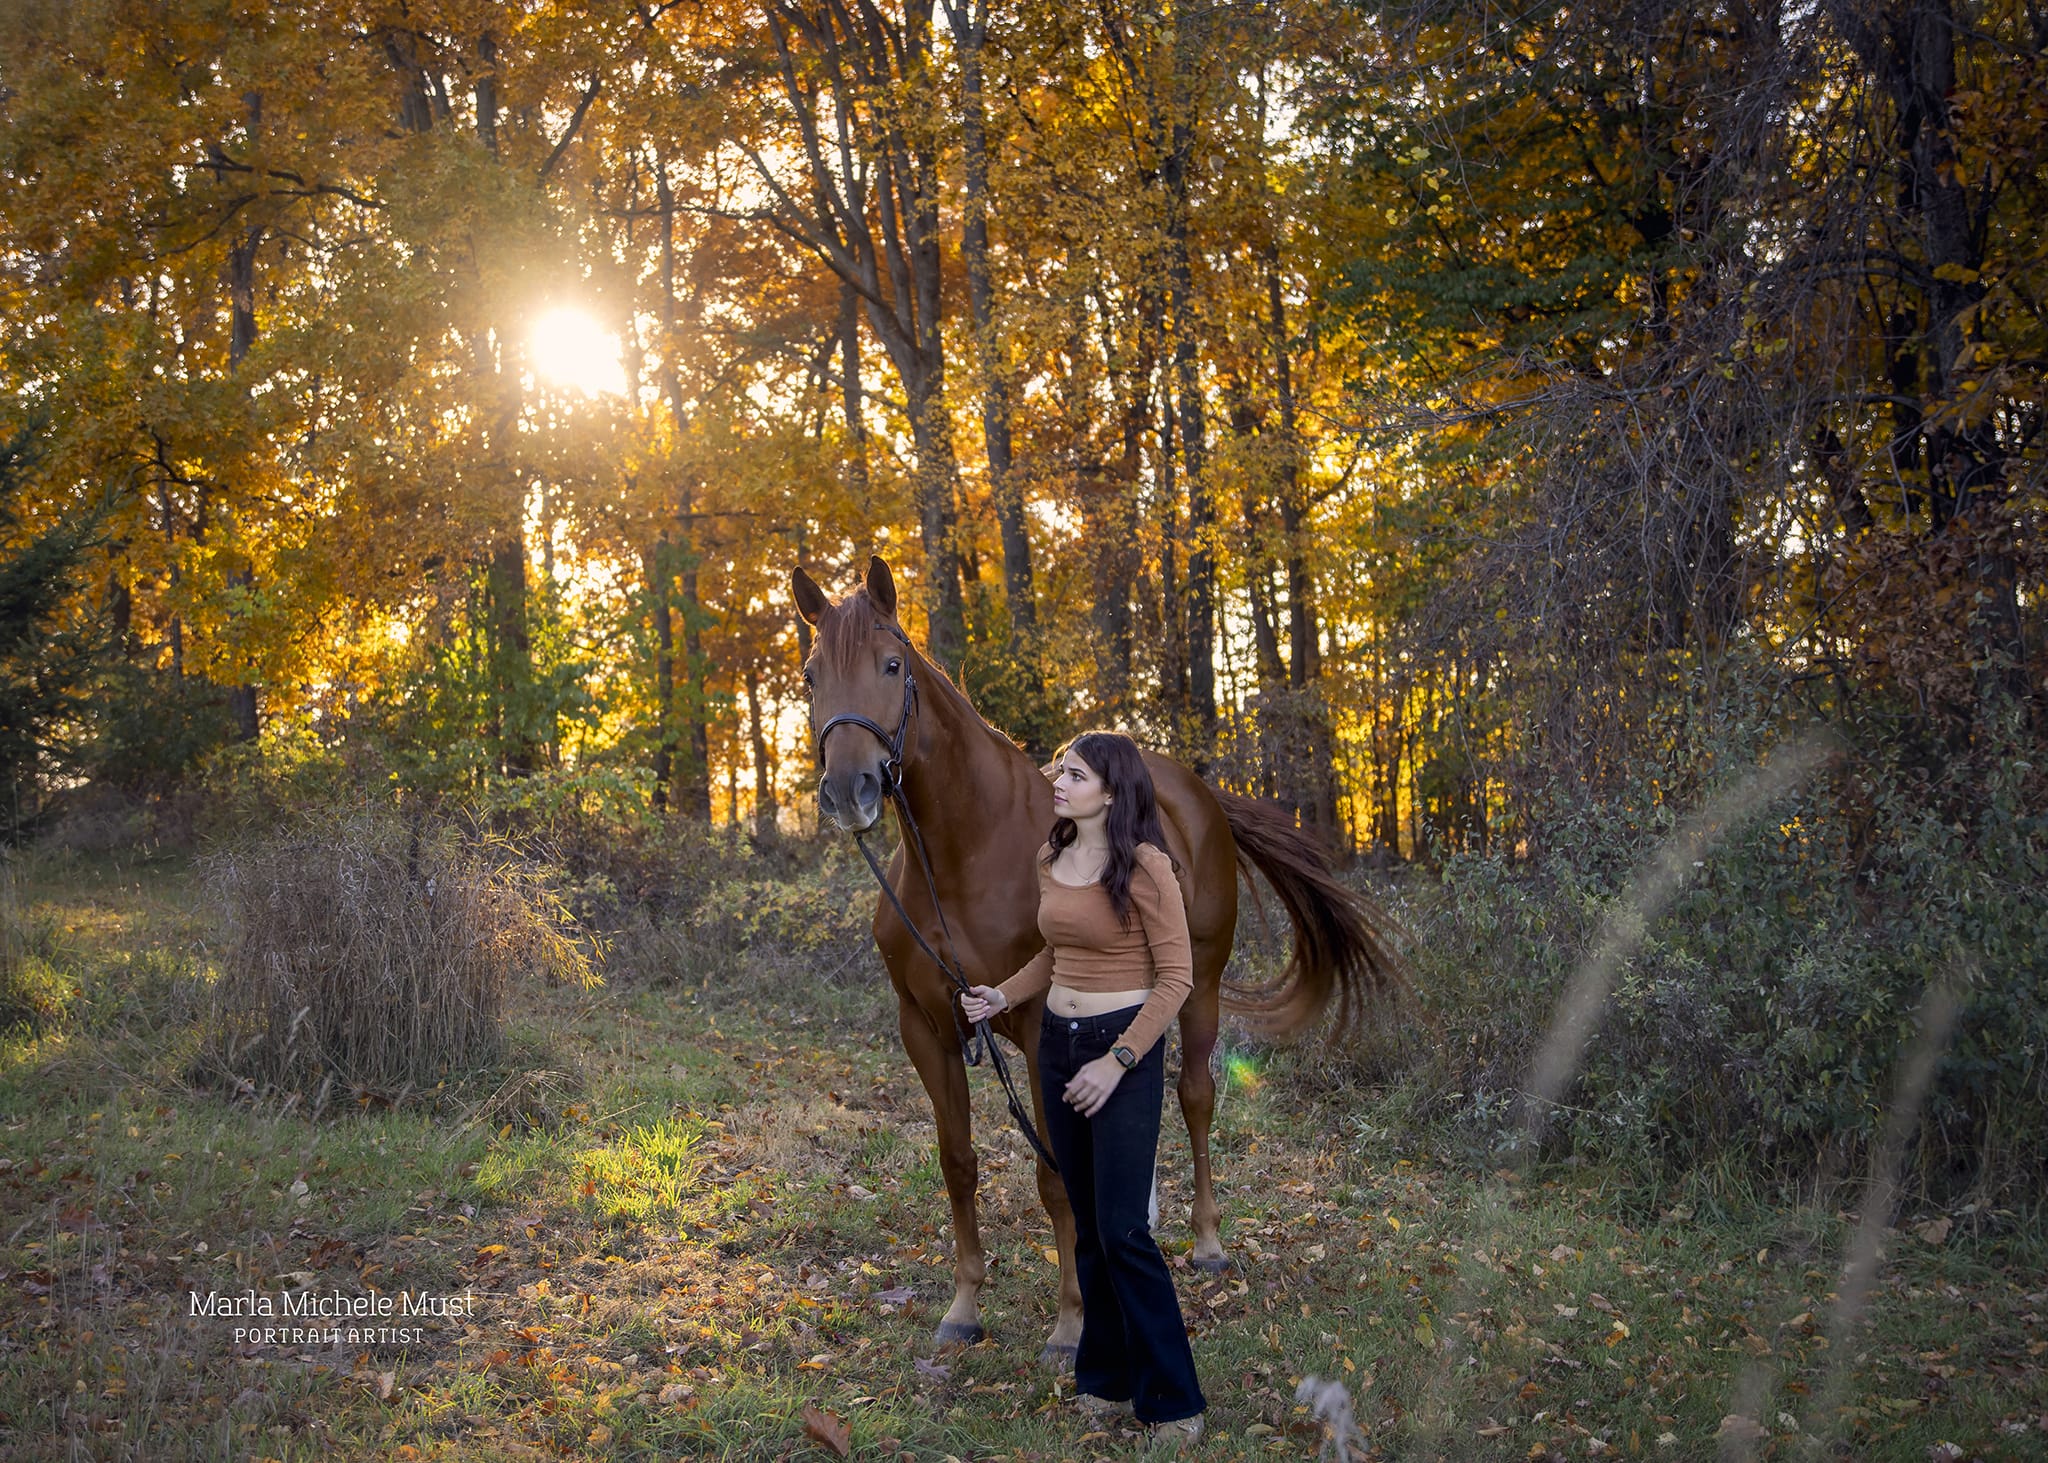 A Detroit equine photographer's portrait: Horse owner gently grasping the horse's nose against a summer sunset and woodland forest..